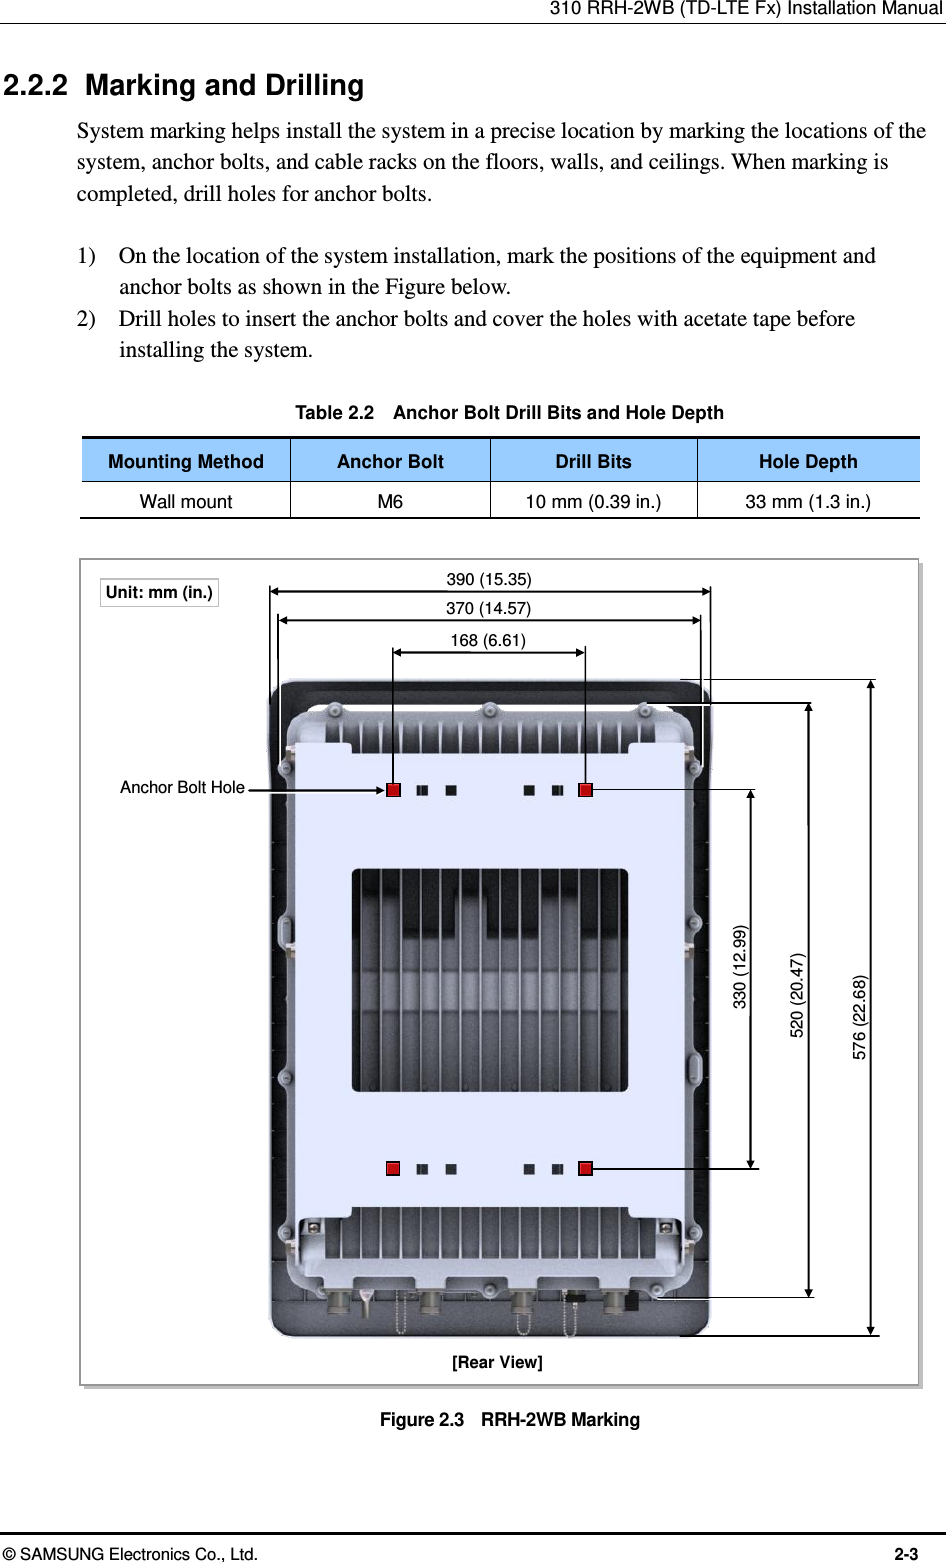 310 RRH-2WB (TD-LTE Fx) Installation Manual  © SAMSUNG Electronics Co., Ltd.  2-3 2.2.2  Marking and Drilling System marking helps install the system in a precise location by marking the locations of the system, anchor bolts, and cable racks on the floors, walls, and ceilings. When marking is completed, drill holes for anchor bolts.  1)    On the location of the system installation, mark the positions of the equipment and anchor bolts as shown in the Figure below. 2)    Drill holes to insert the anchor bolts and cover the holes with acetate tape before installing the system.  Table 2.2    Anchor Bolt Drill Bits and Hole Depth Mounting Method Anchor Bolt Drill Bits Hole Depth Wall mount M6 10 mm (0.39 in.) 33 mm (1.3 in.)  Figure 2.3    RRH-2WB Marking Anchor Bolt Hole [Rear View] 168 (6.61) 370 (14.57) 576 (22.68) 520 (20.47) 330 (12.99) 390 (15.35) Unit: mm (in.) 